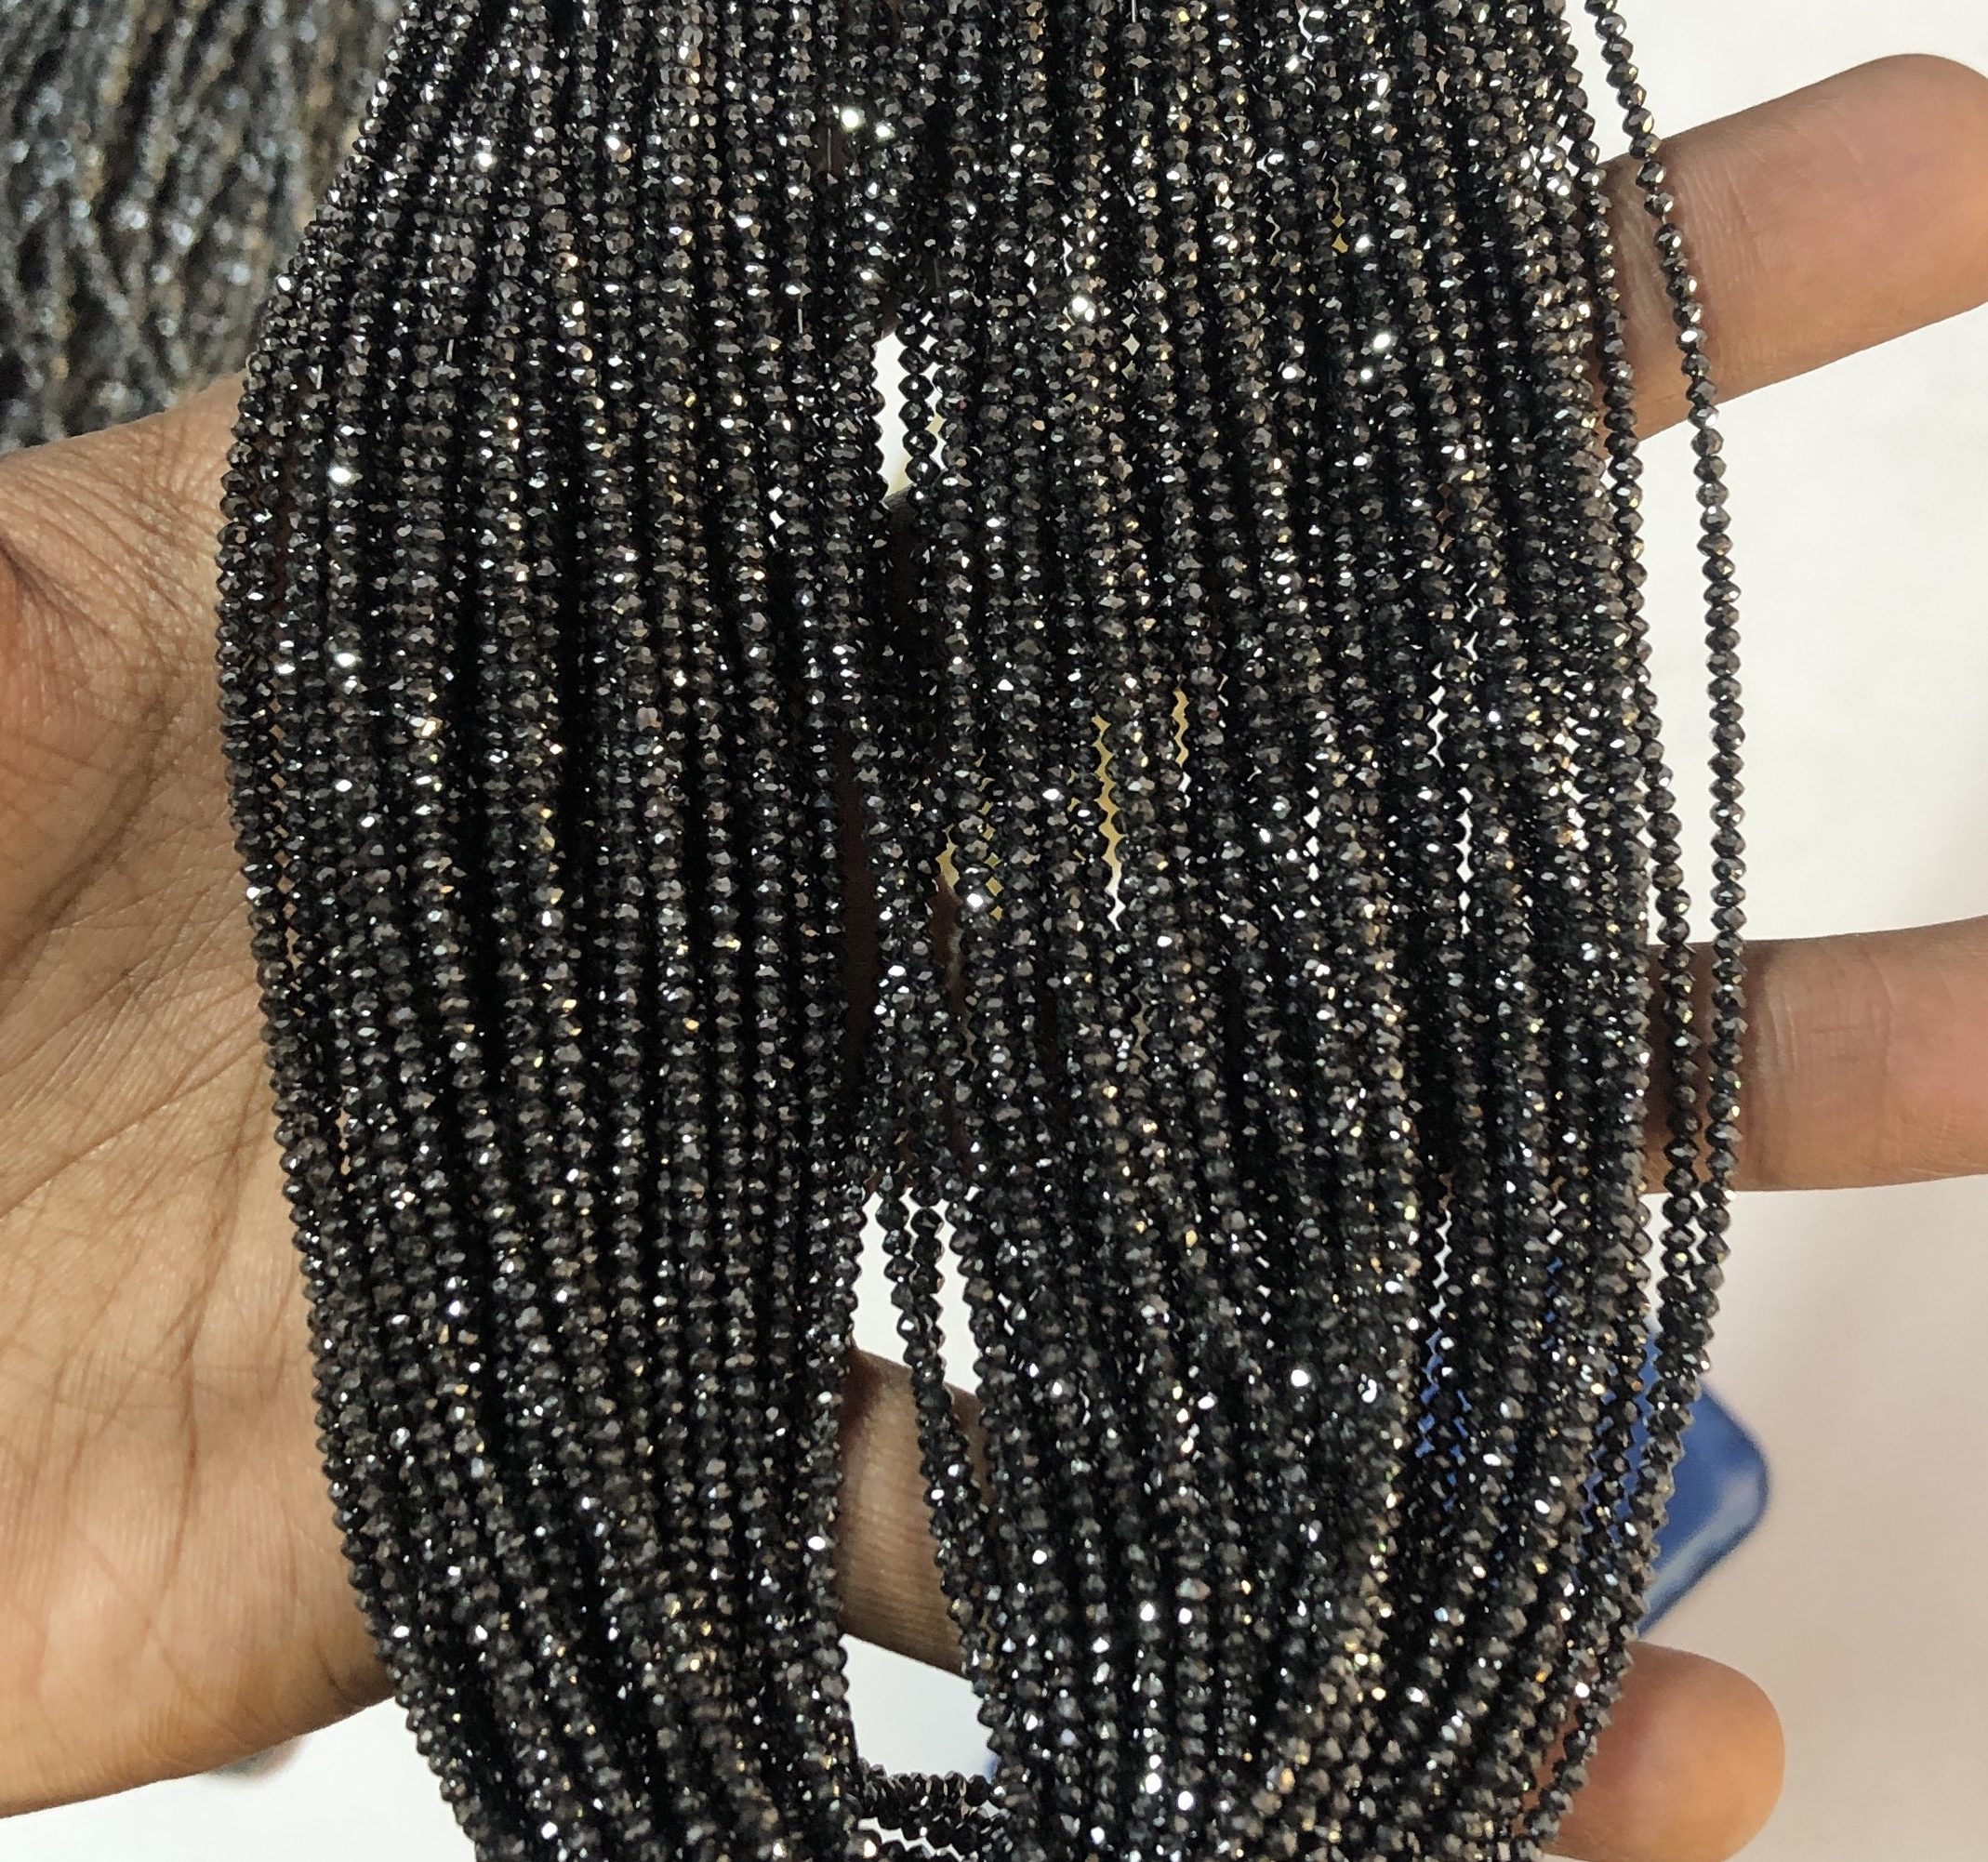 Shop Black Diamond Faceted Rondelle Beads Strand - FREE SHIPPING